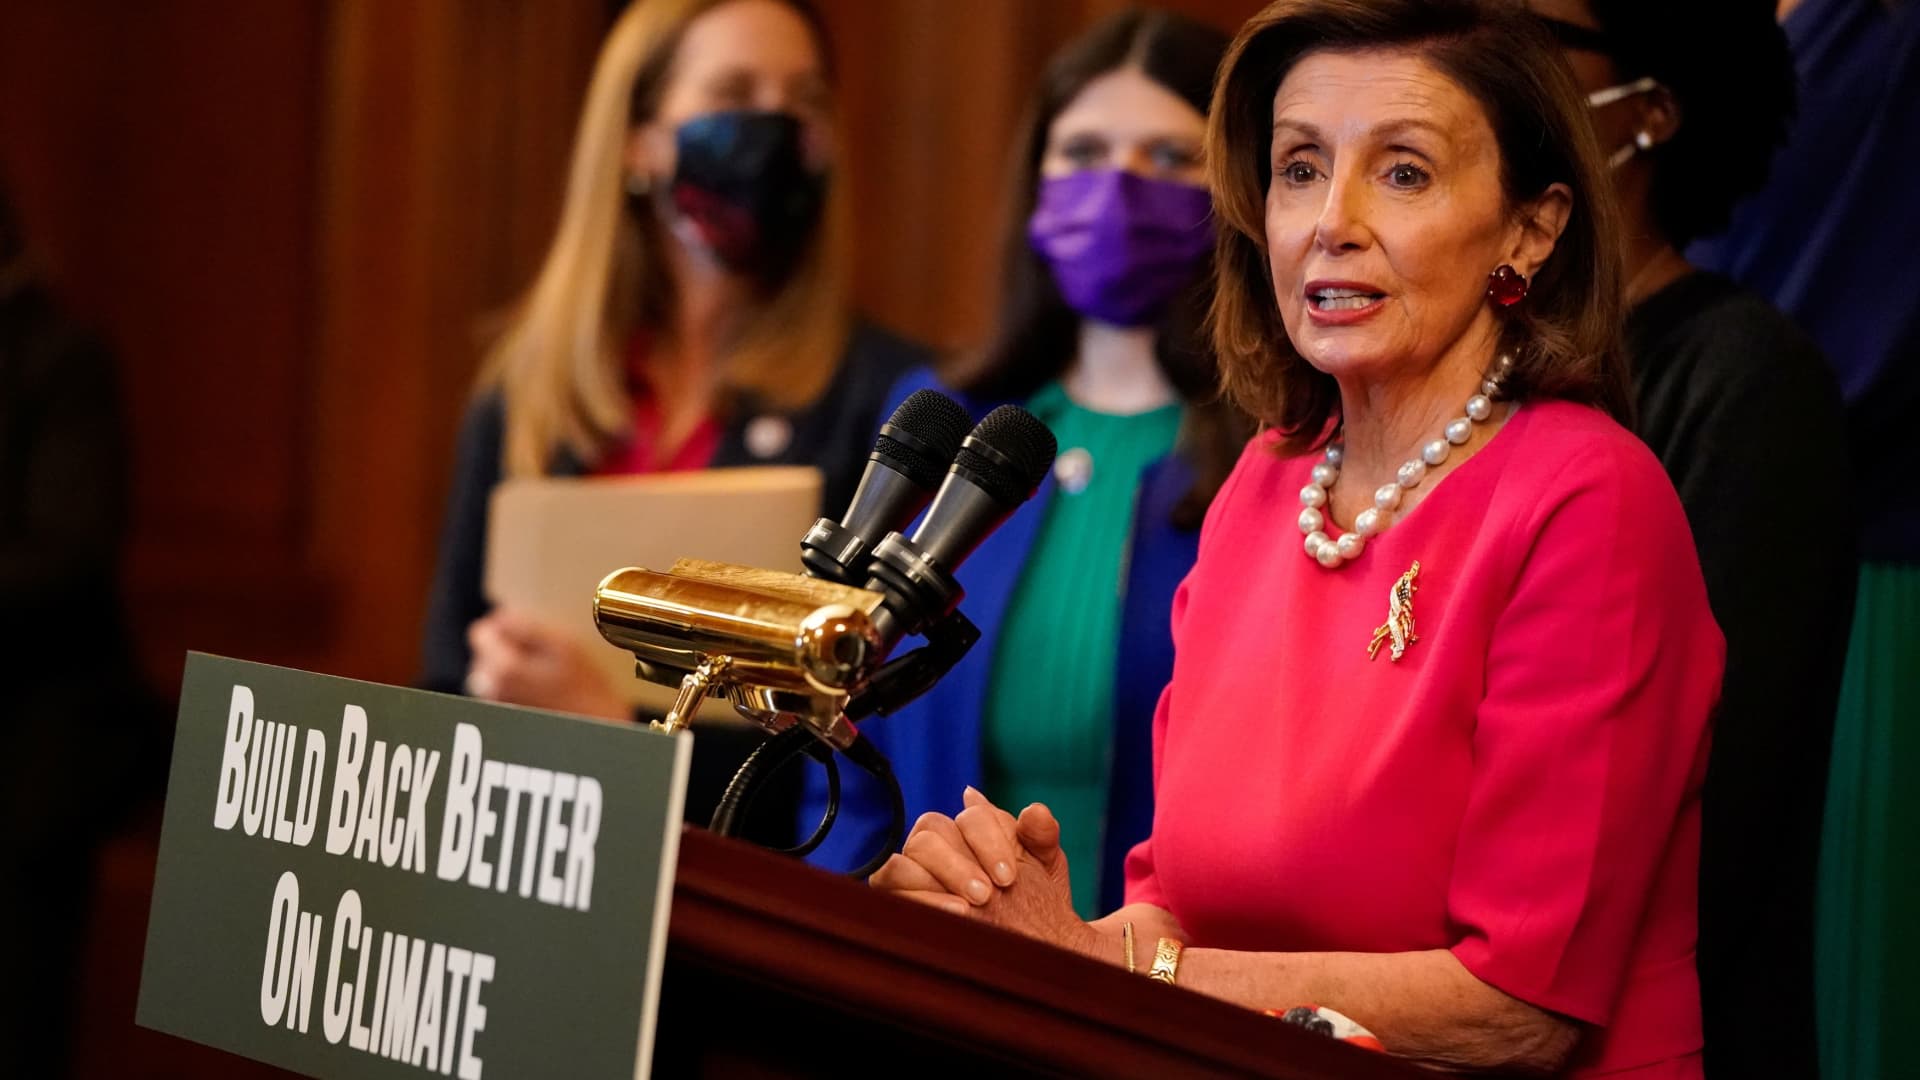 House Speaker Nancy Pelosi (D-CA) speaks during an event about the Build Back Better Act and climate crisis at the U.S. Capitol in Washington, U.S., September 28, 2021.